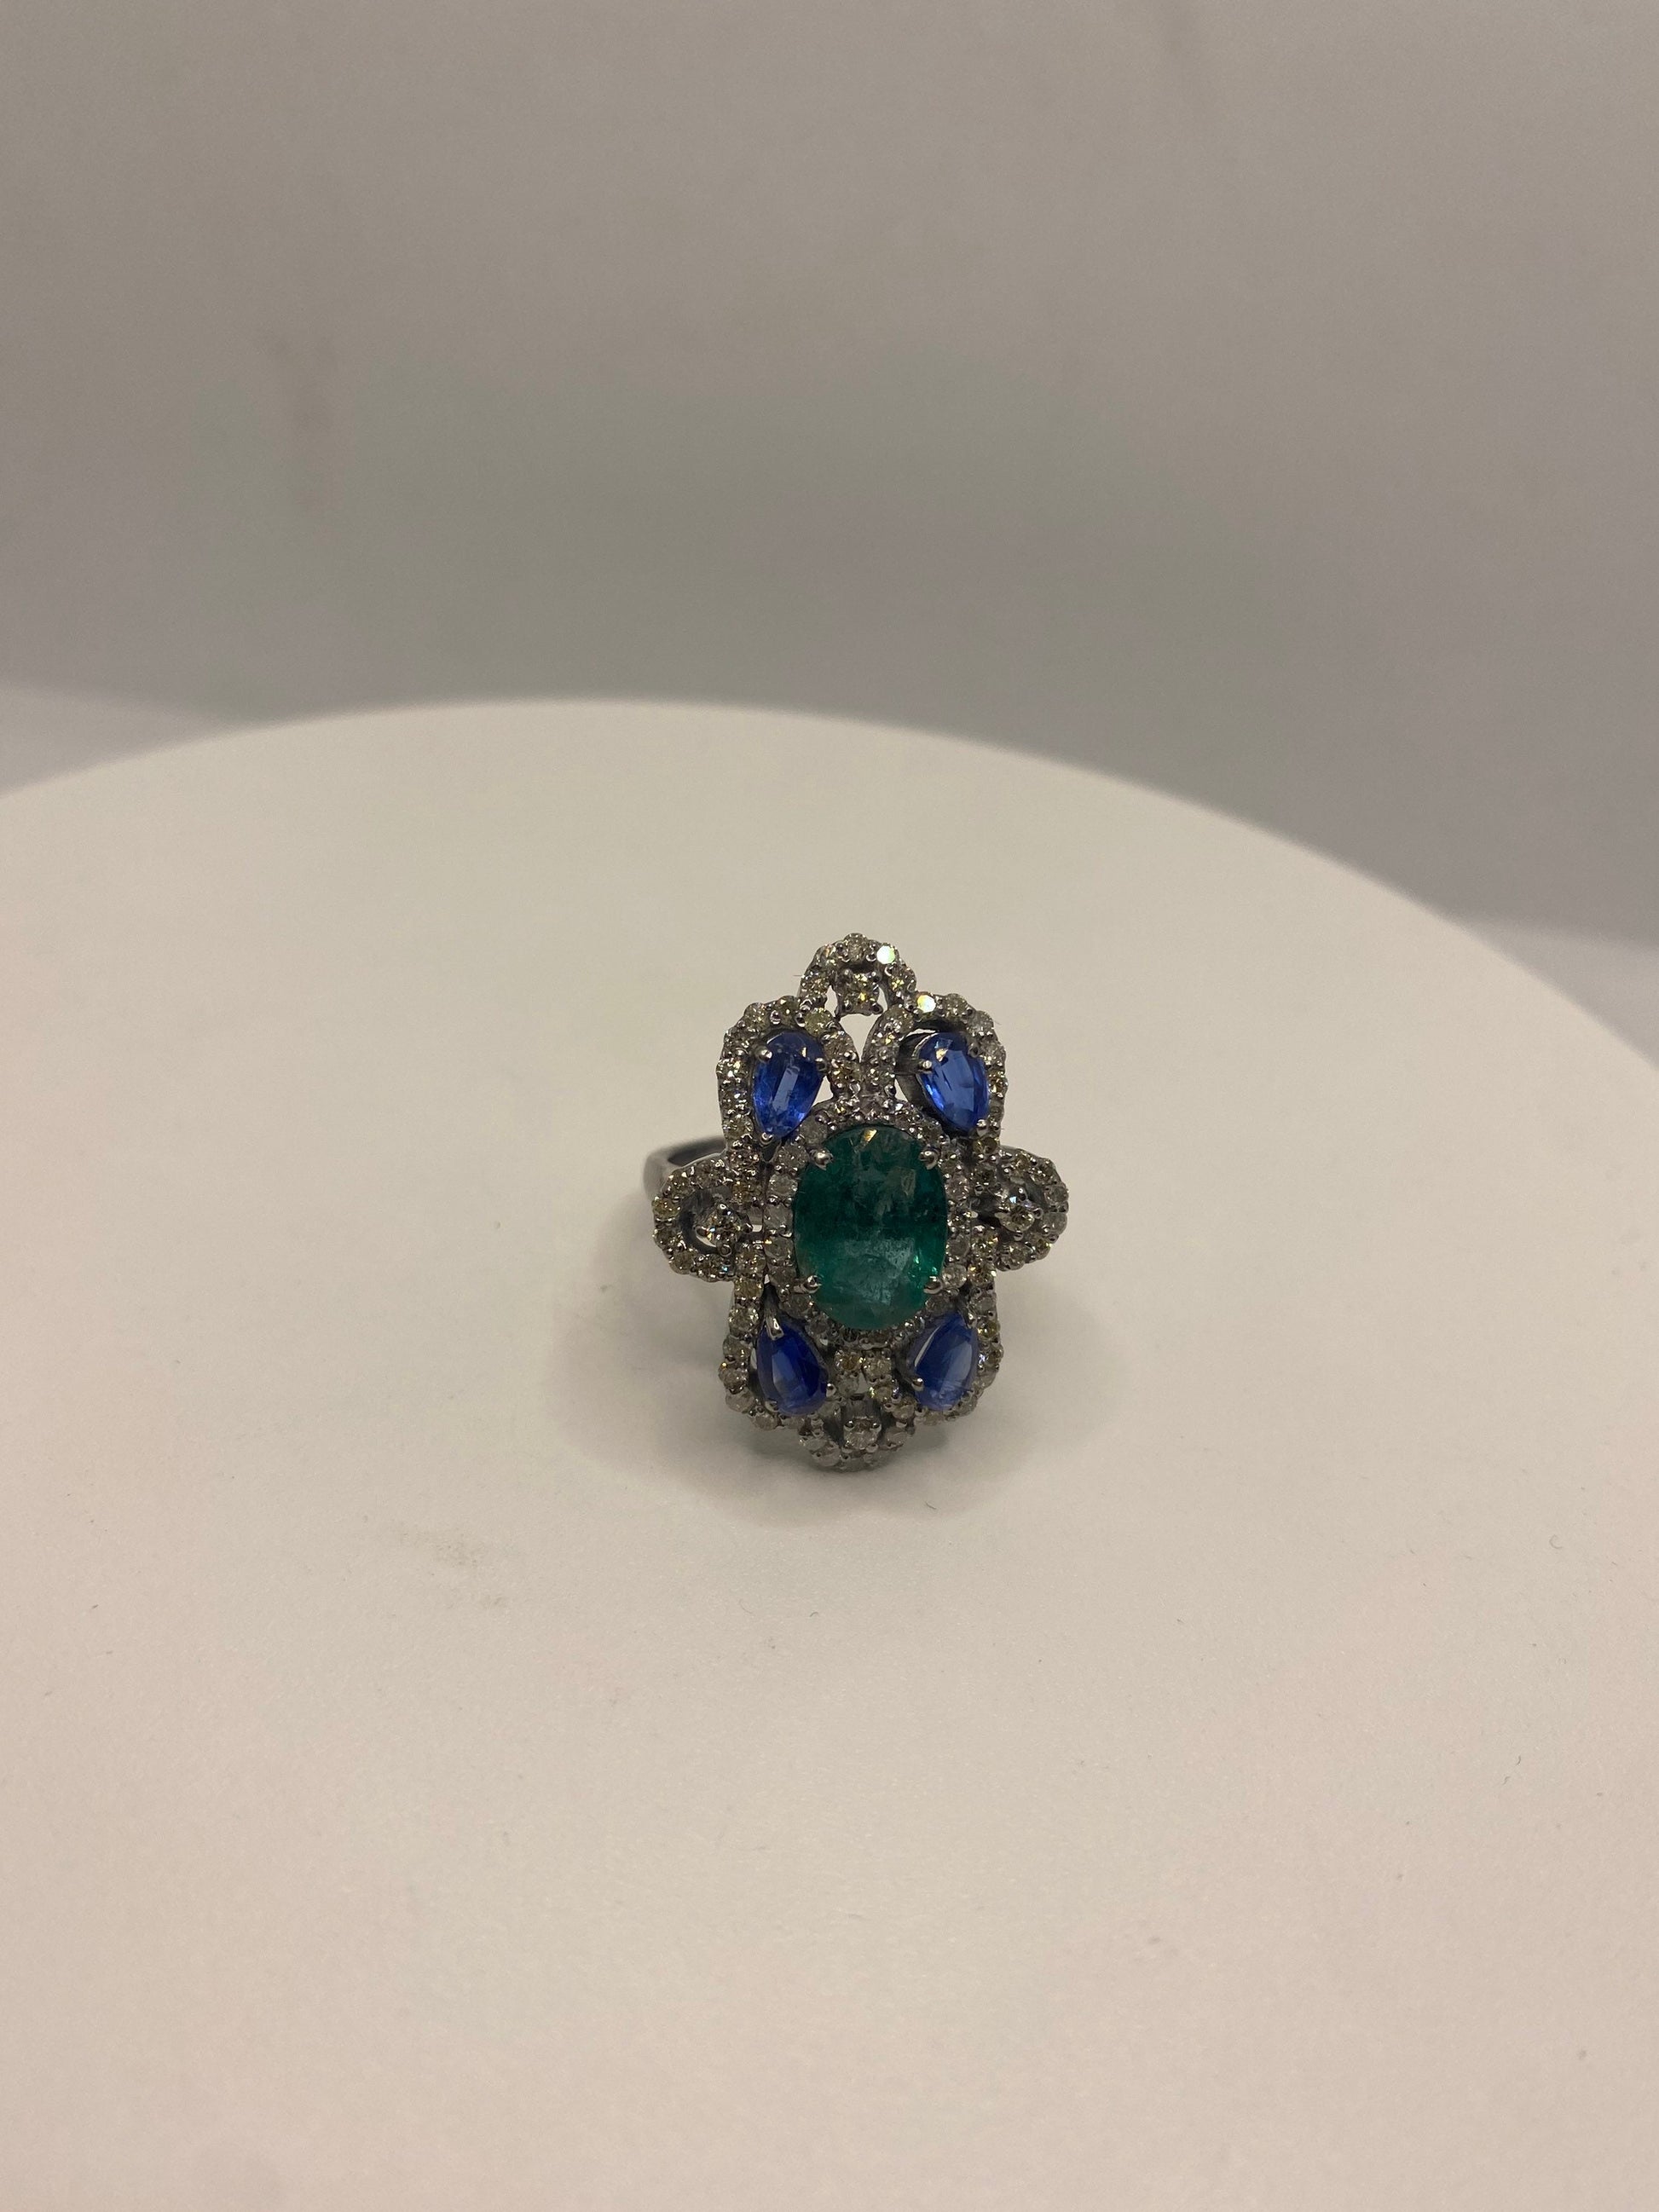 Vintage Emerald Tanzanite Diamond Cocktail Ring 925 Sterling Silver Size 6.5